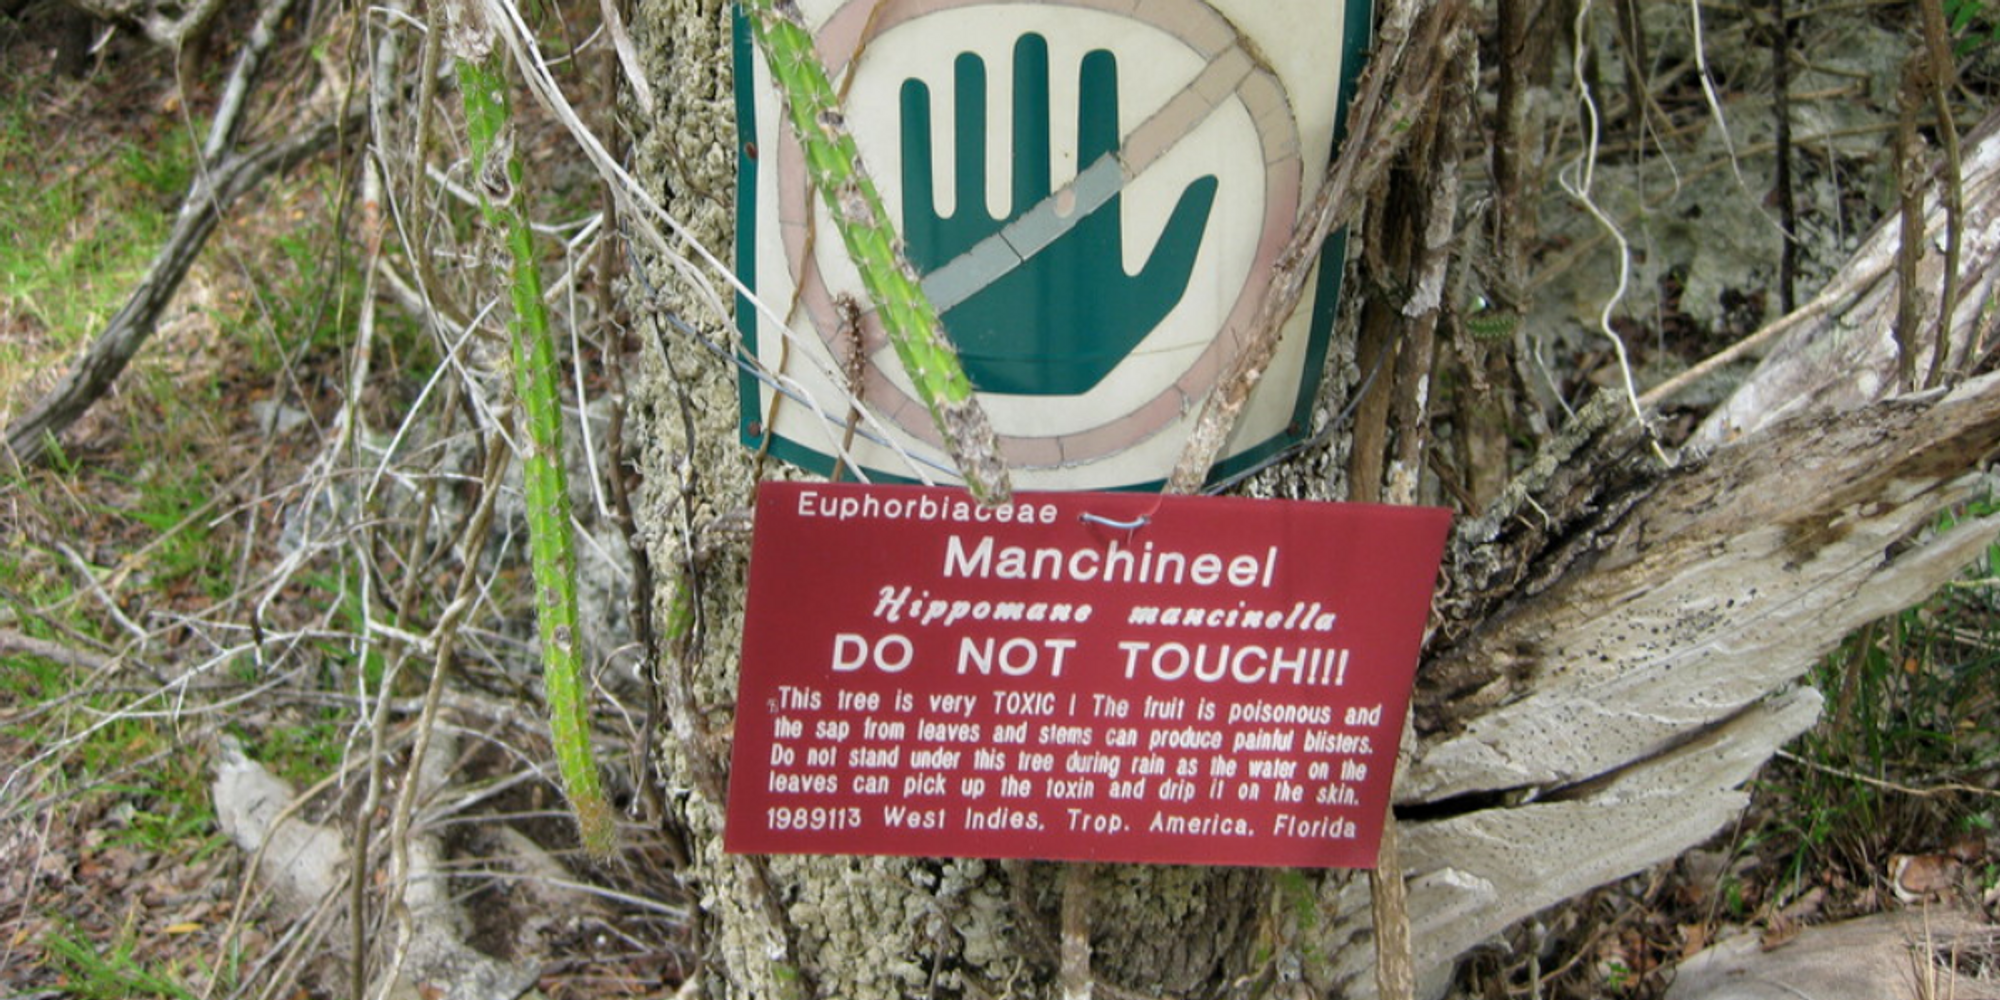 The Deadliest Tree In The World Is Found In Florida & You Can Get Poisoned By Touching It